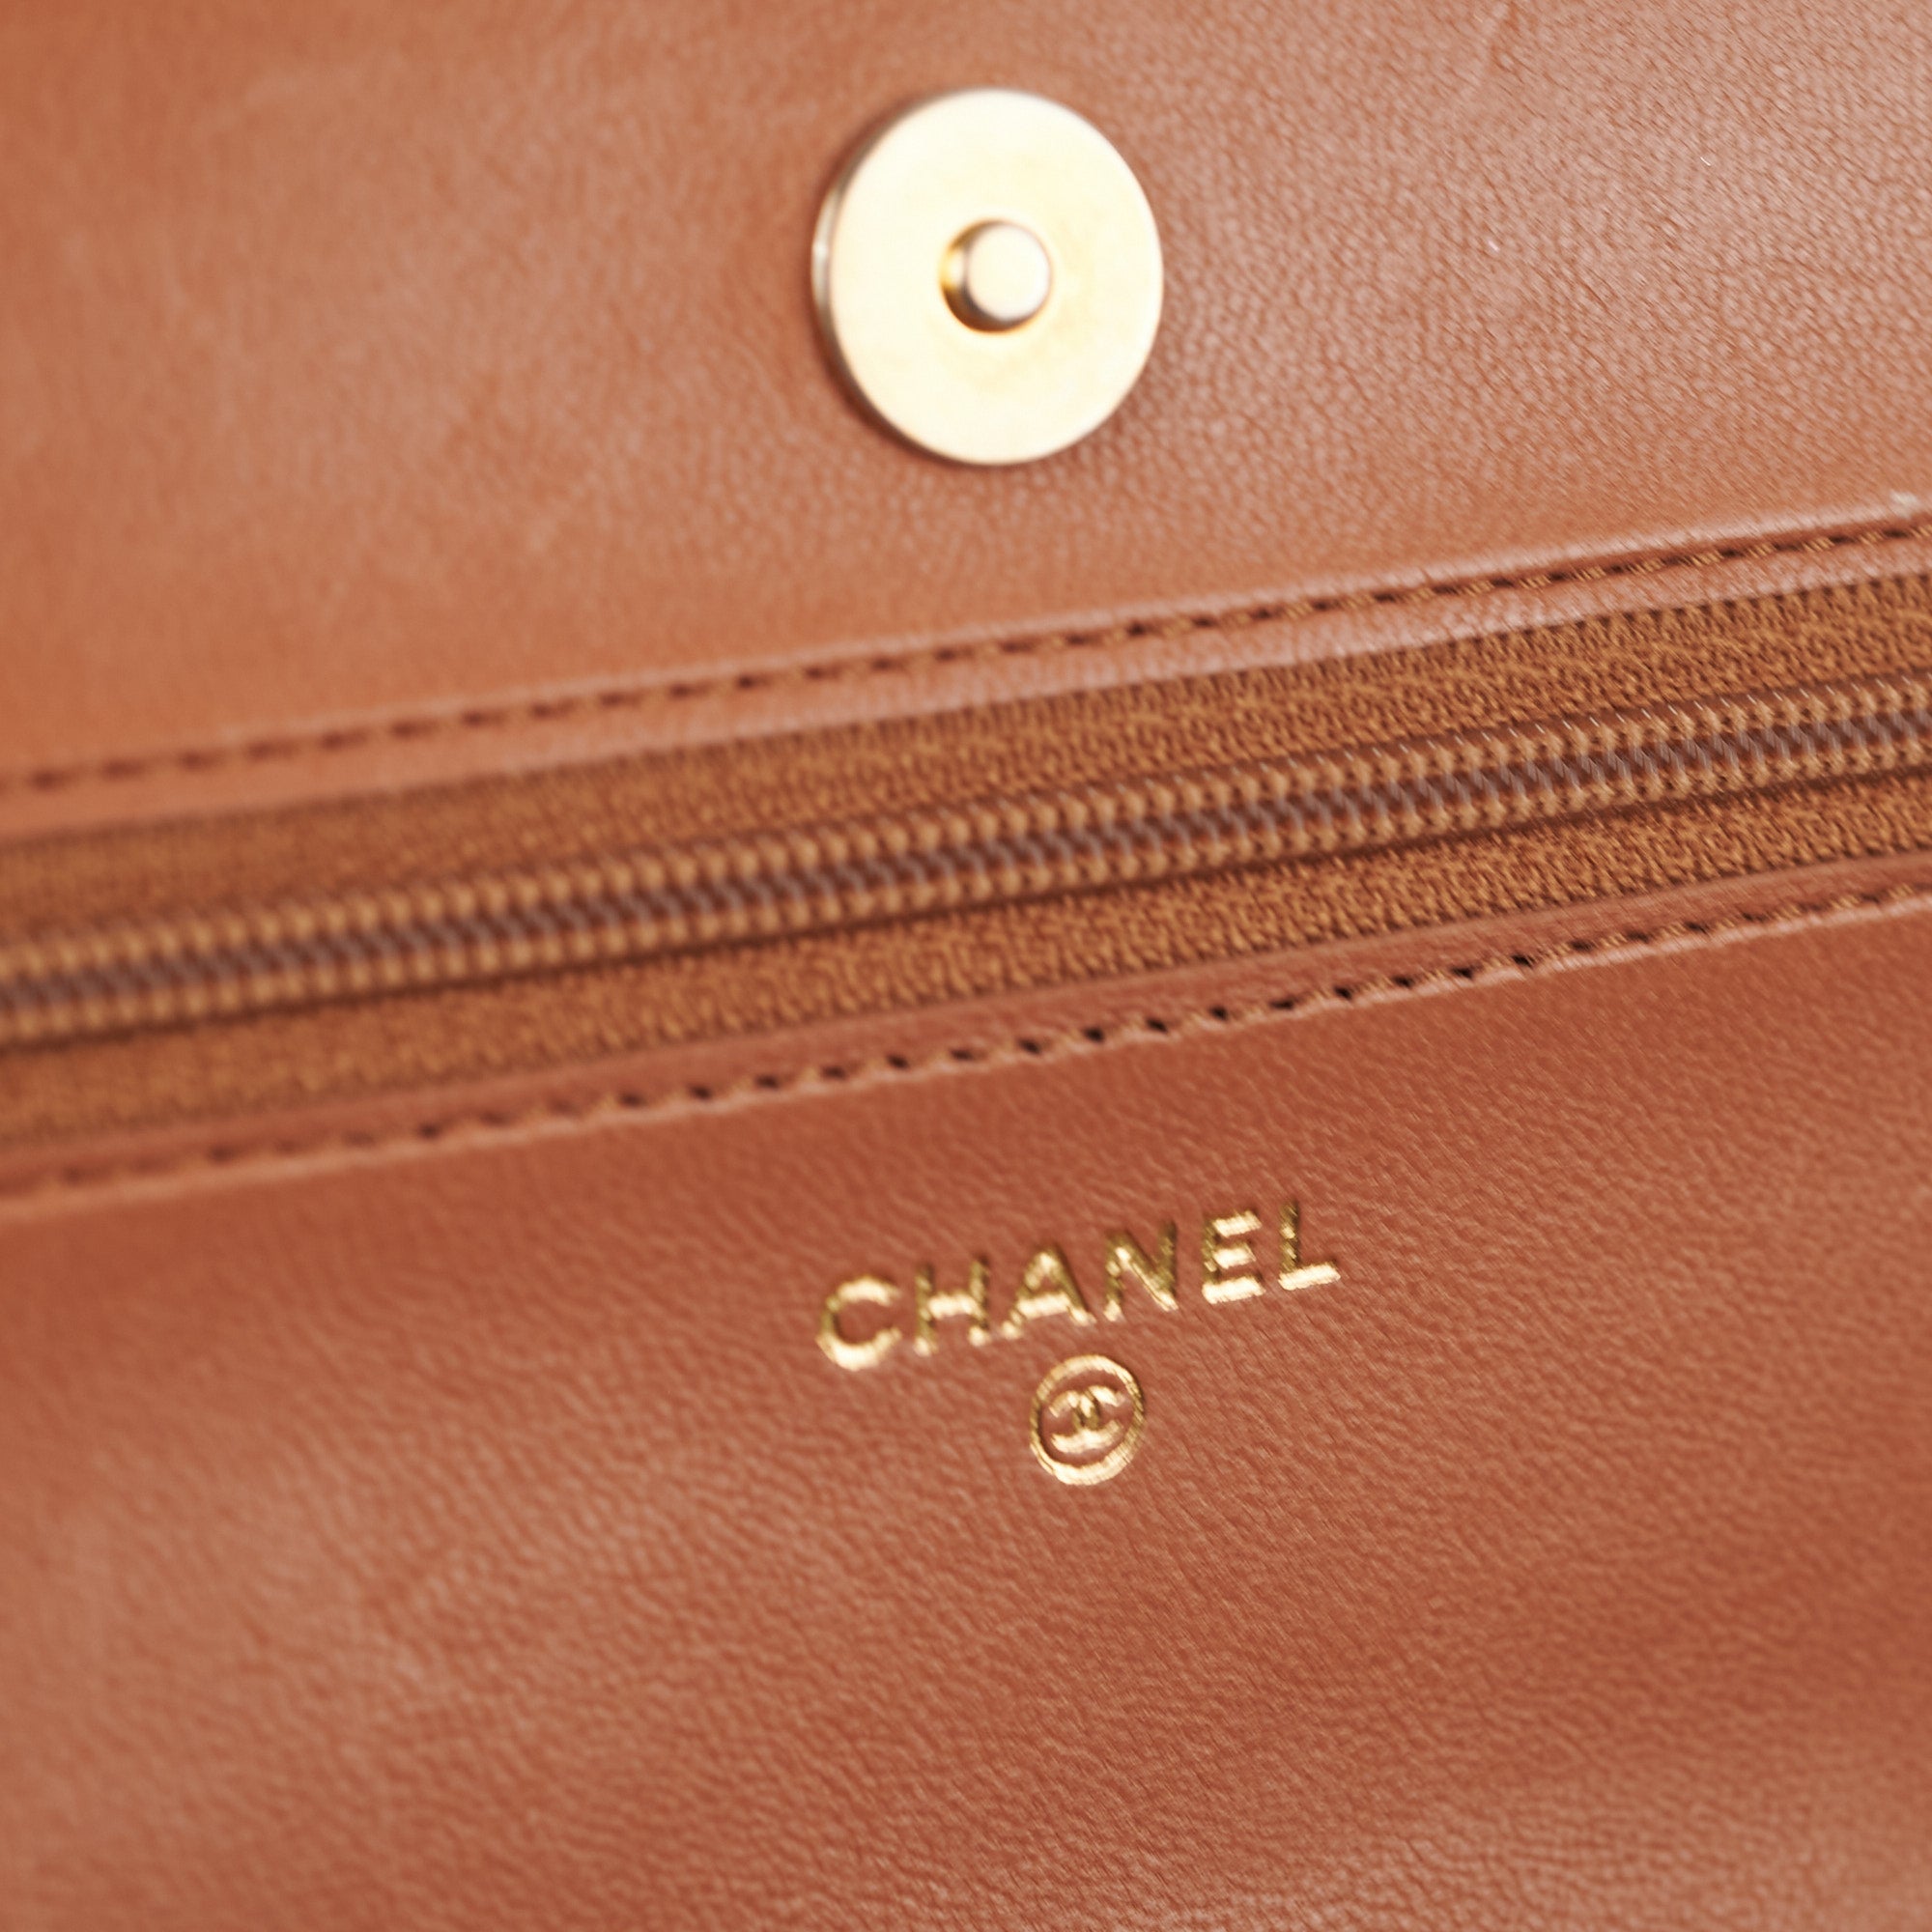 Chanel 19 leather wallet Chanel Camel in Leather - 23519800